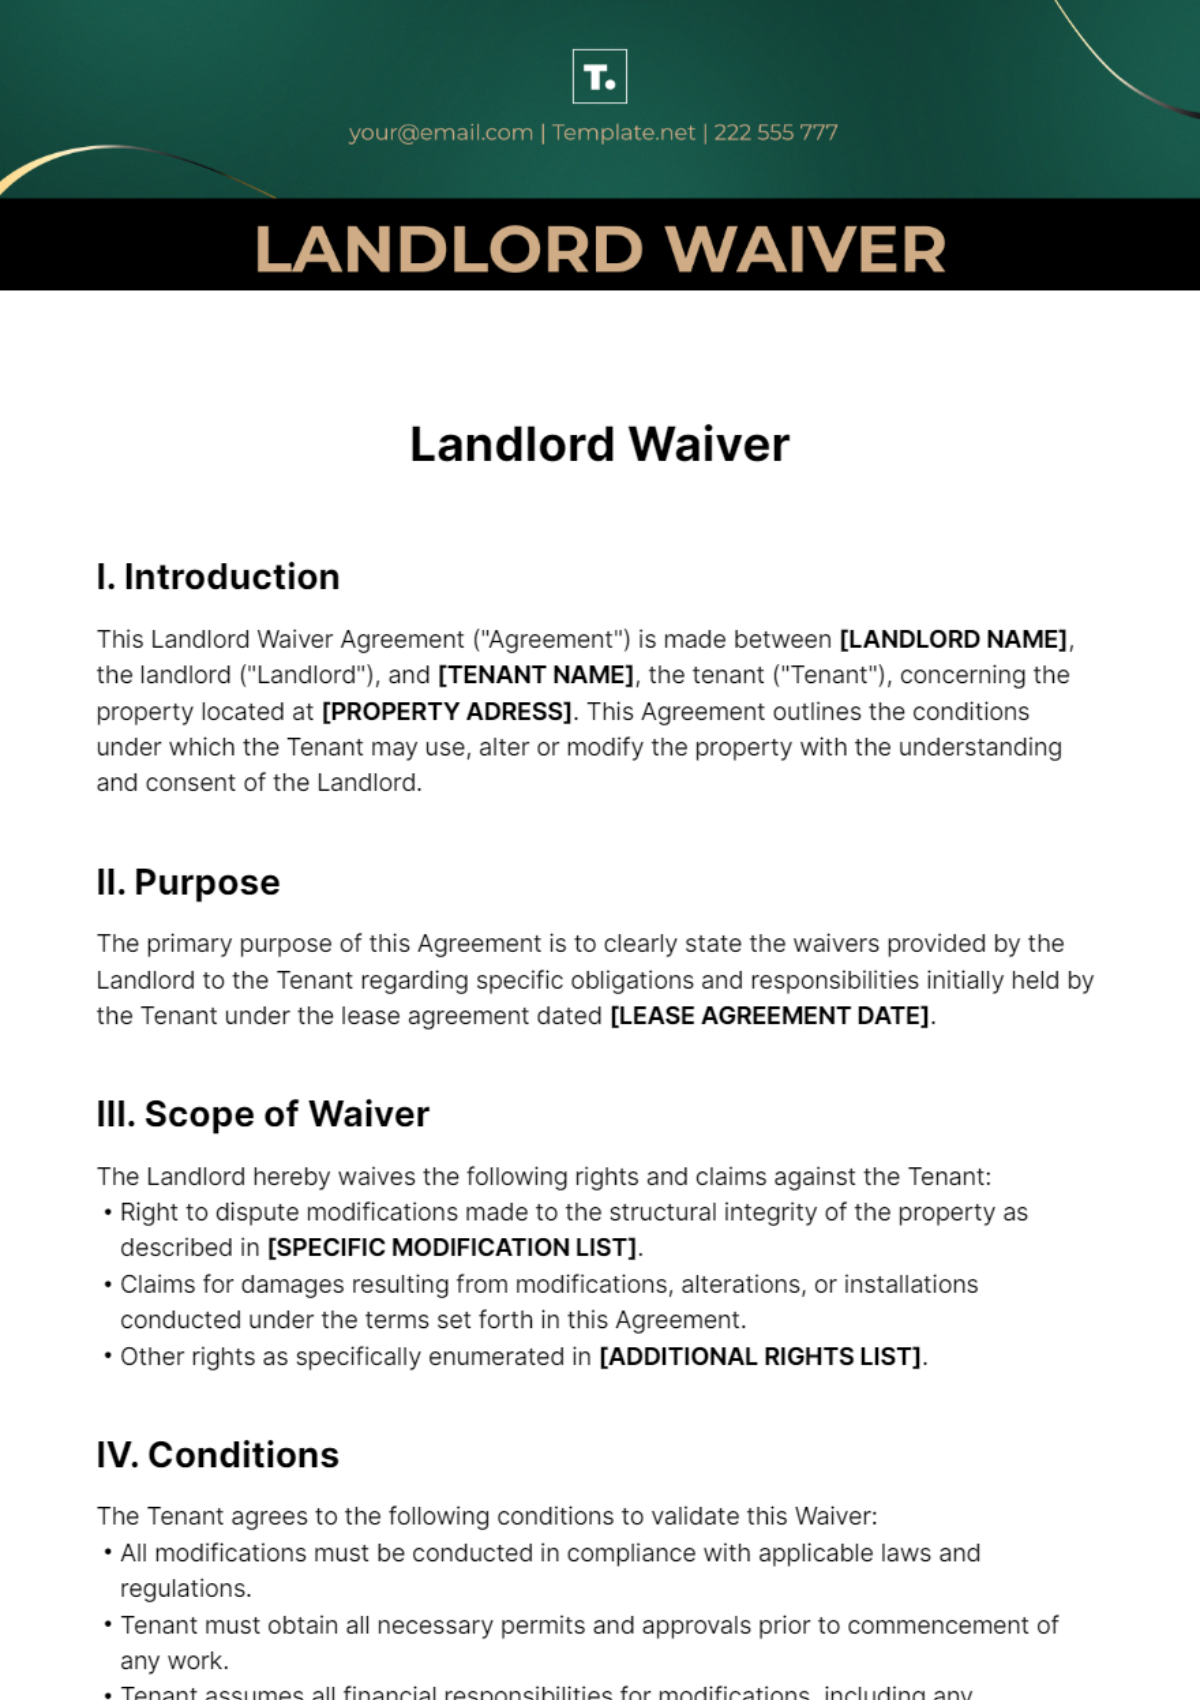 Landlord Waiver Template